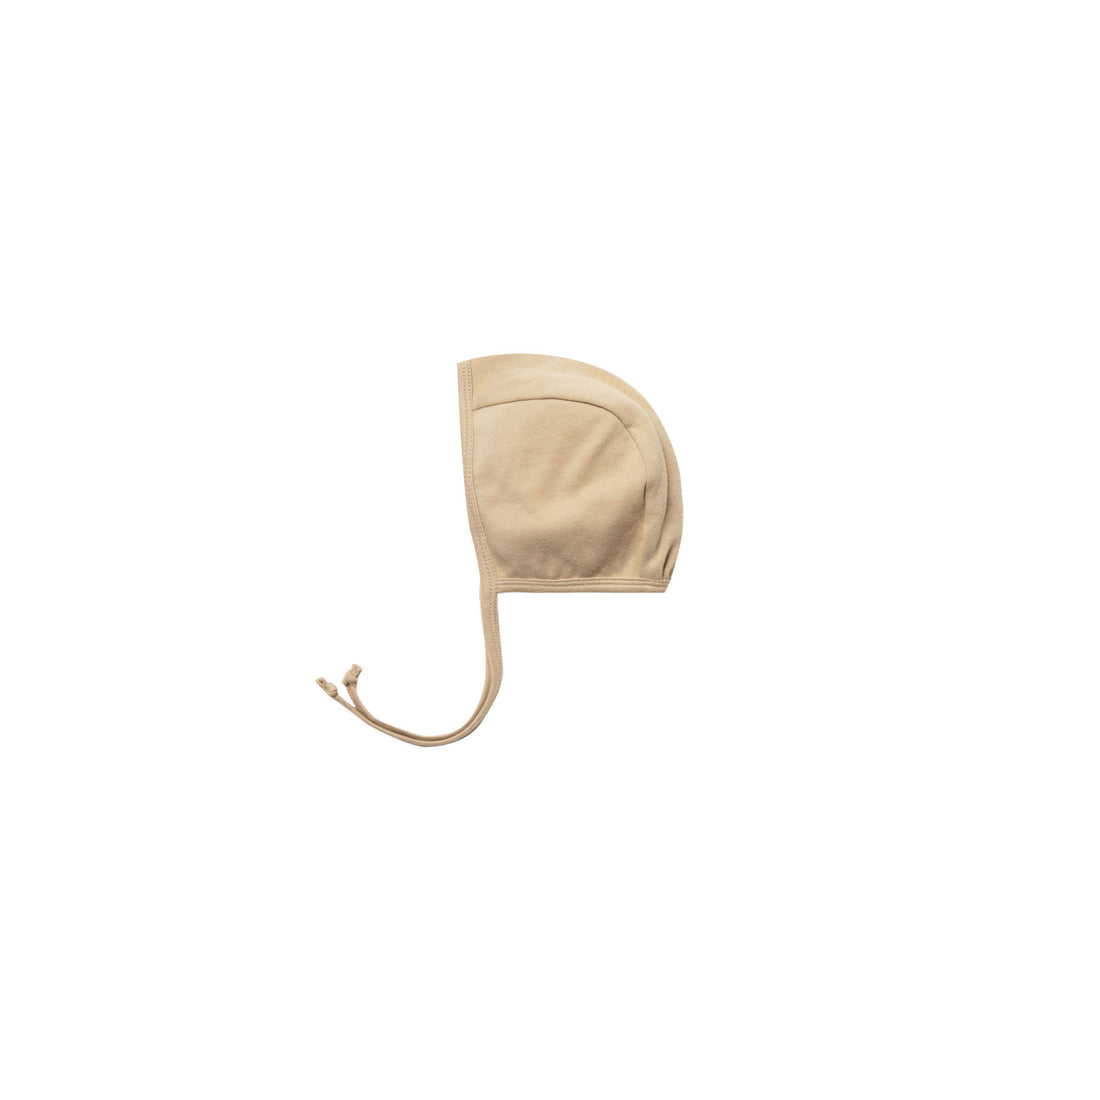 Quincy Mae Honey Organic Brushed Jersey Baby Bonnet